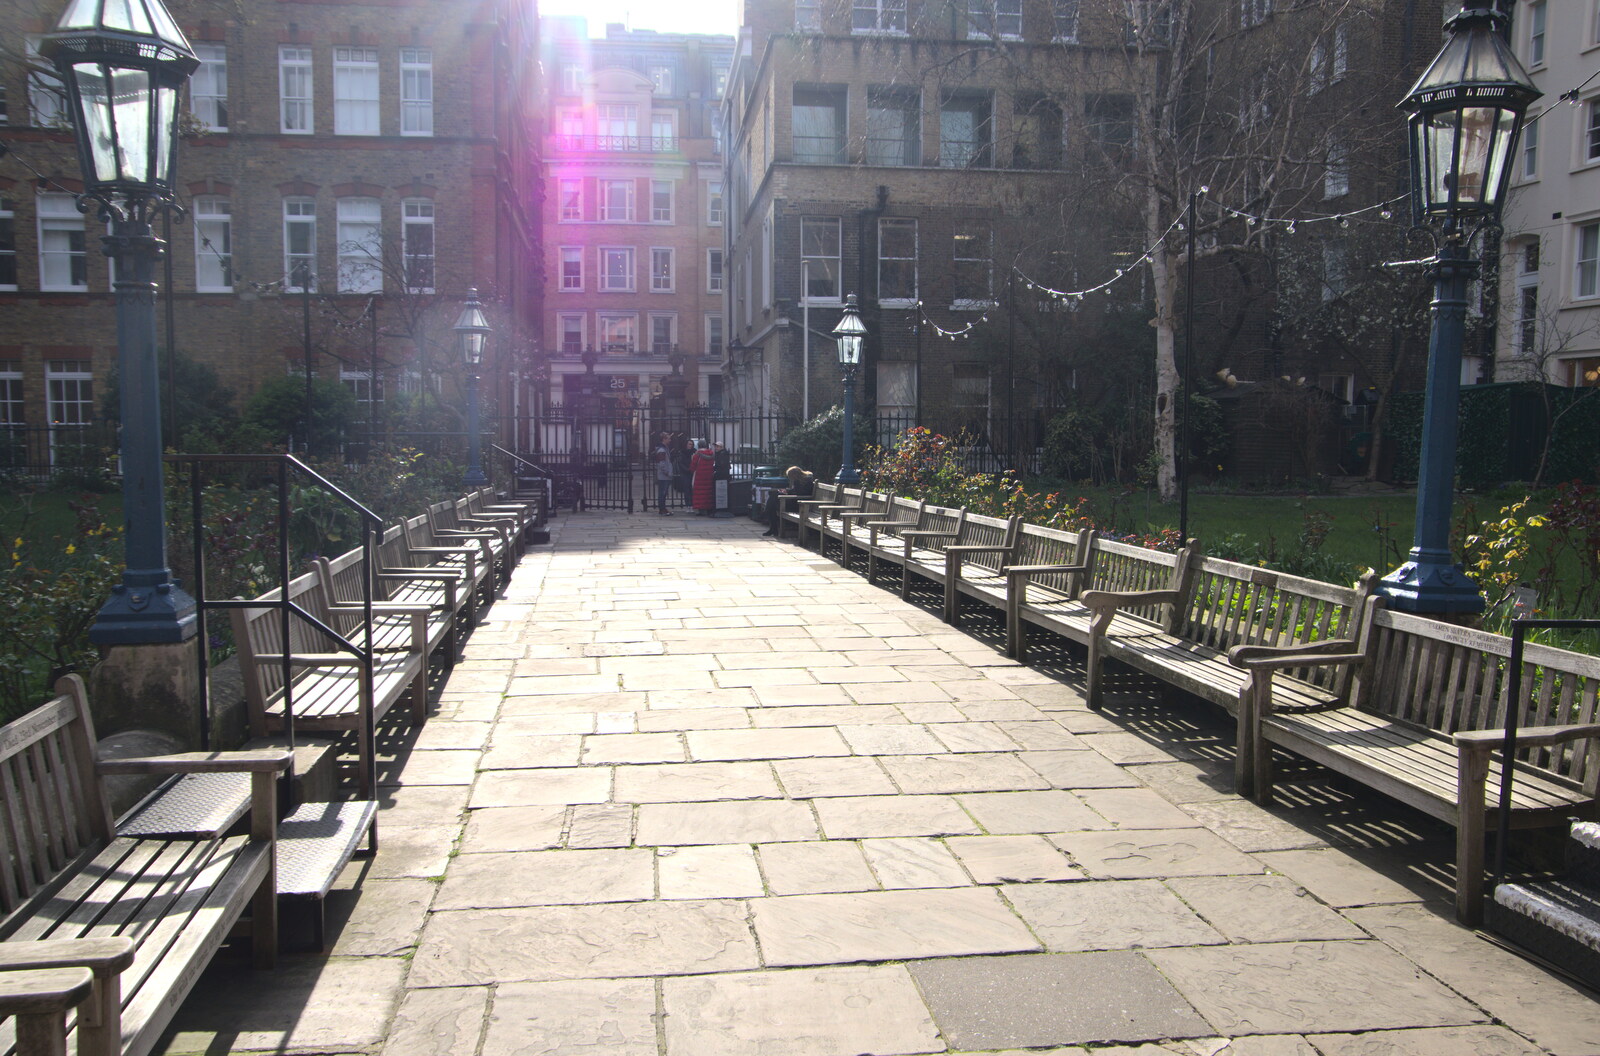 The path to the church, contra jour from A SwiftKey Memorial Service, Covent Garden, London  - 13th March 2020